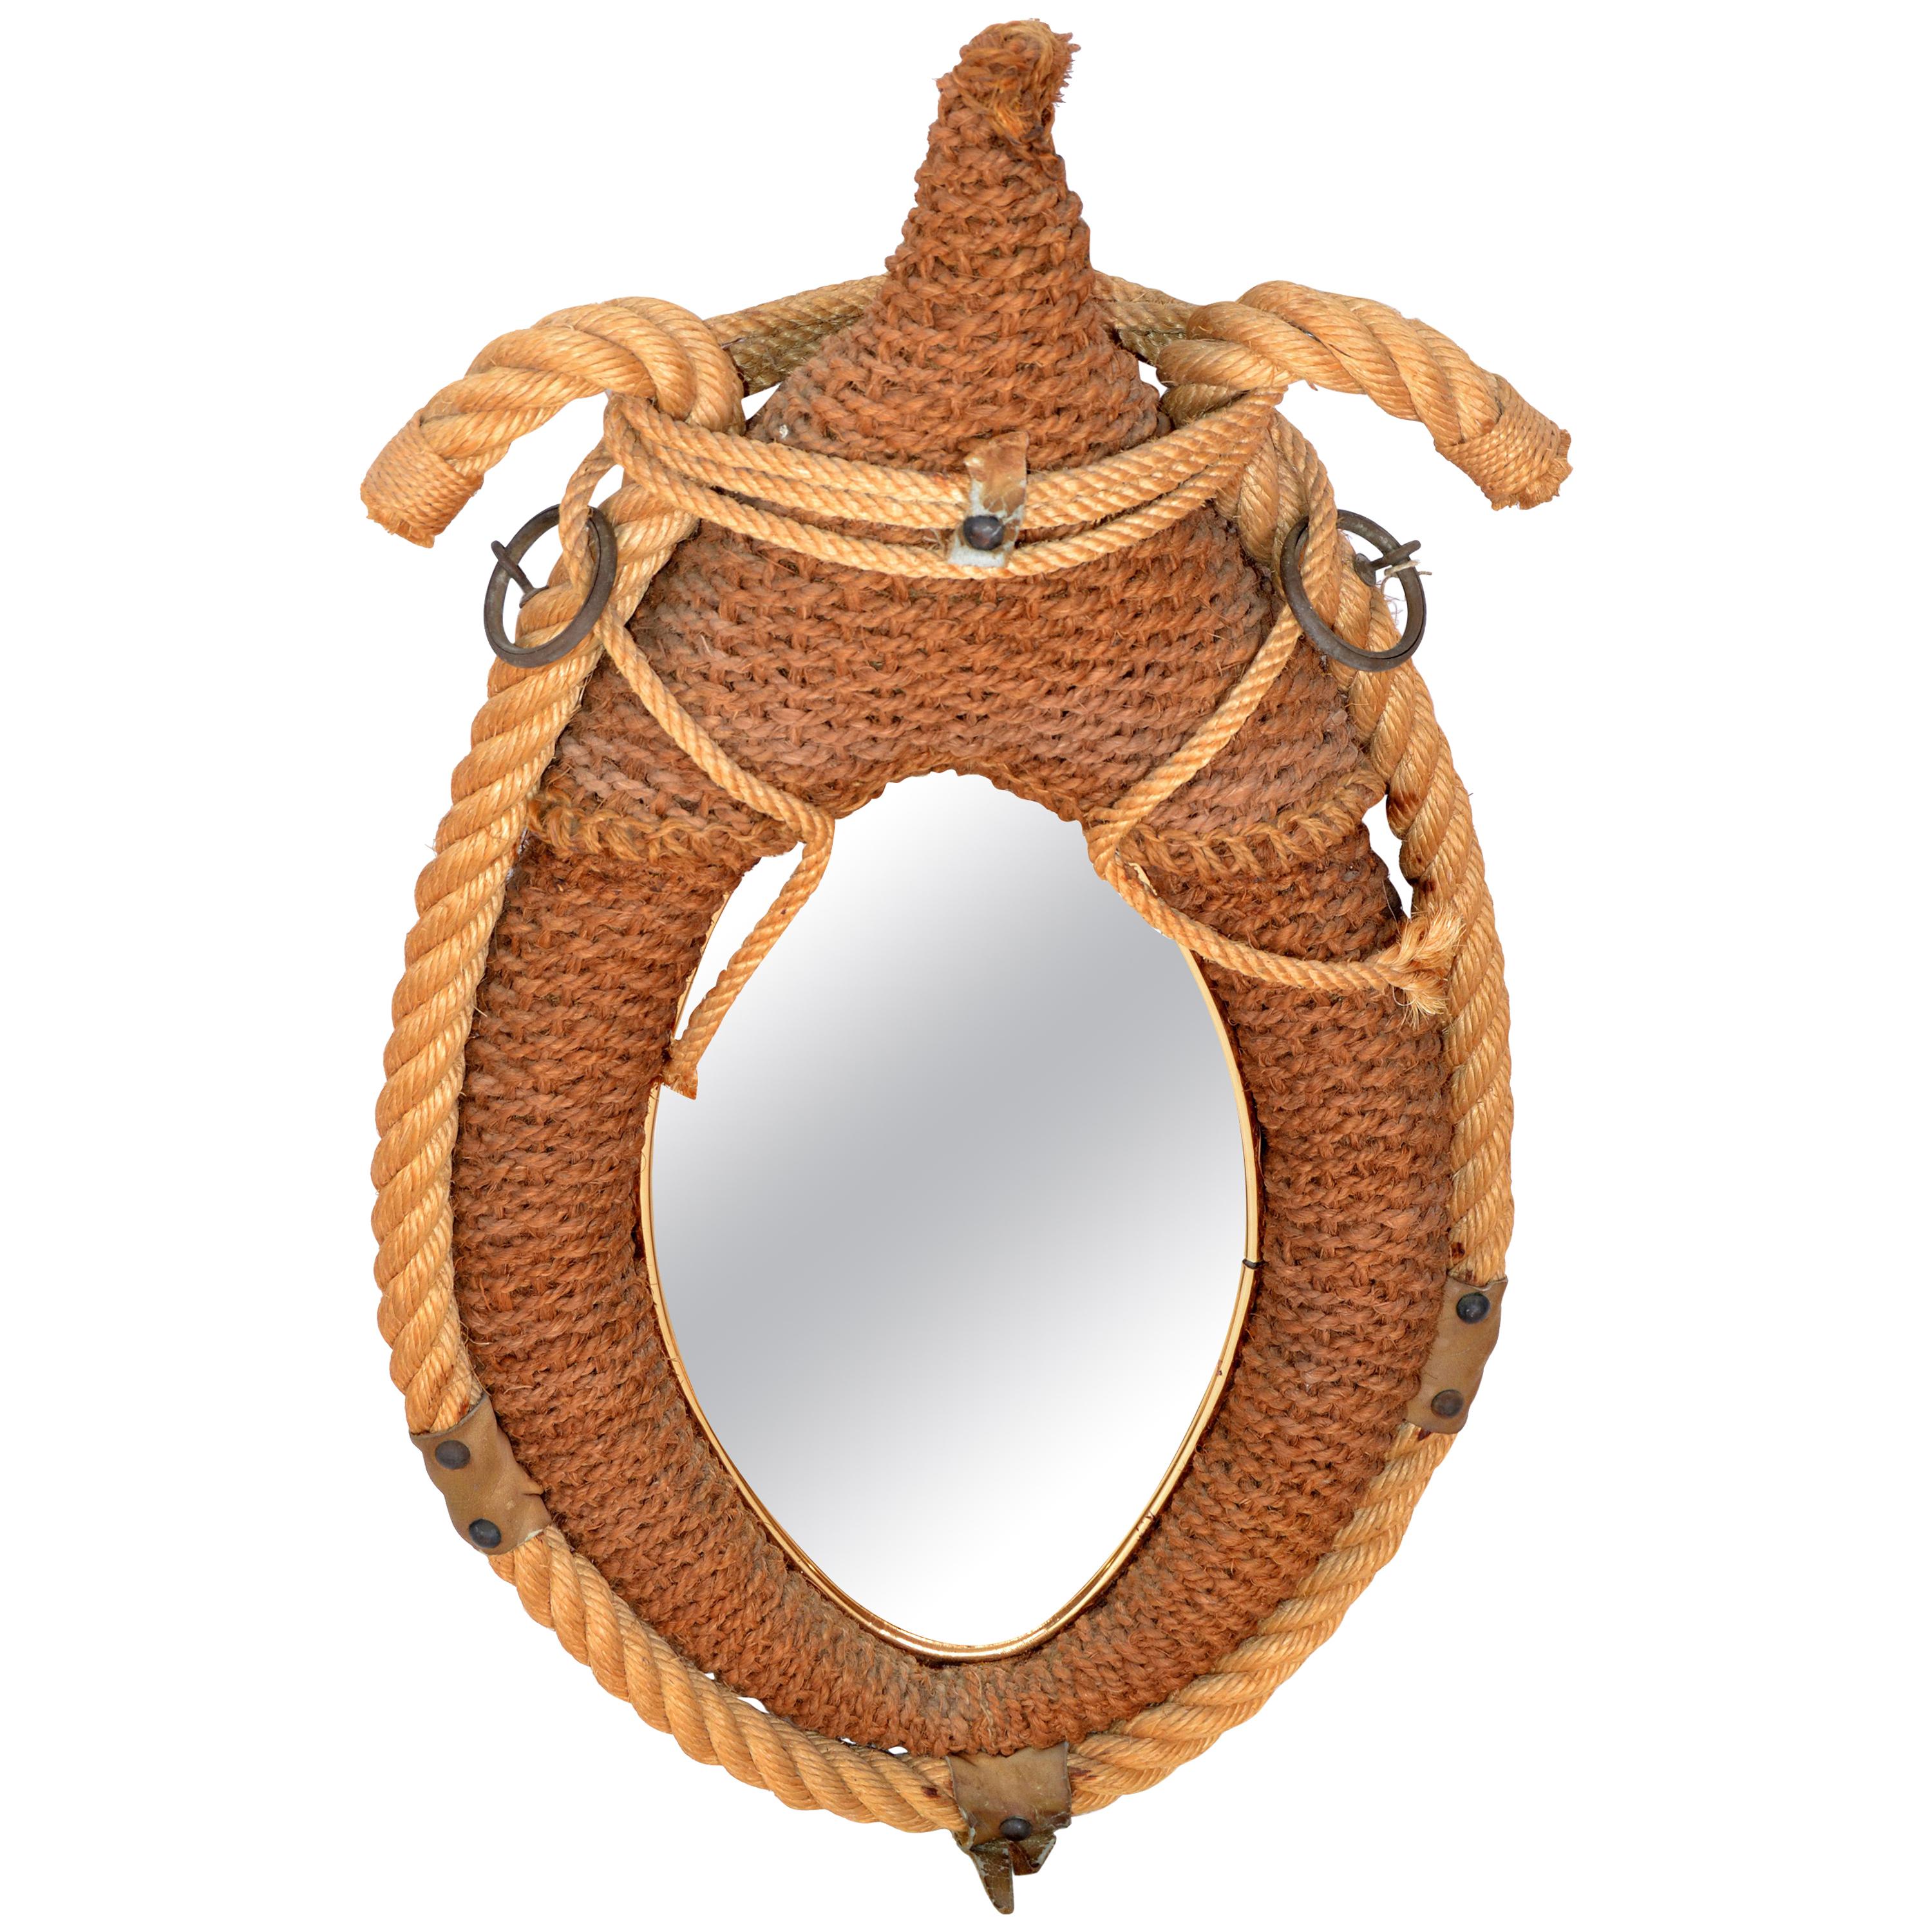 Audoux Minet Style Beige Oval Wall Mirror Nautical French Provincial Rope & Jute